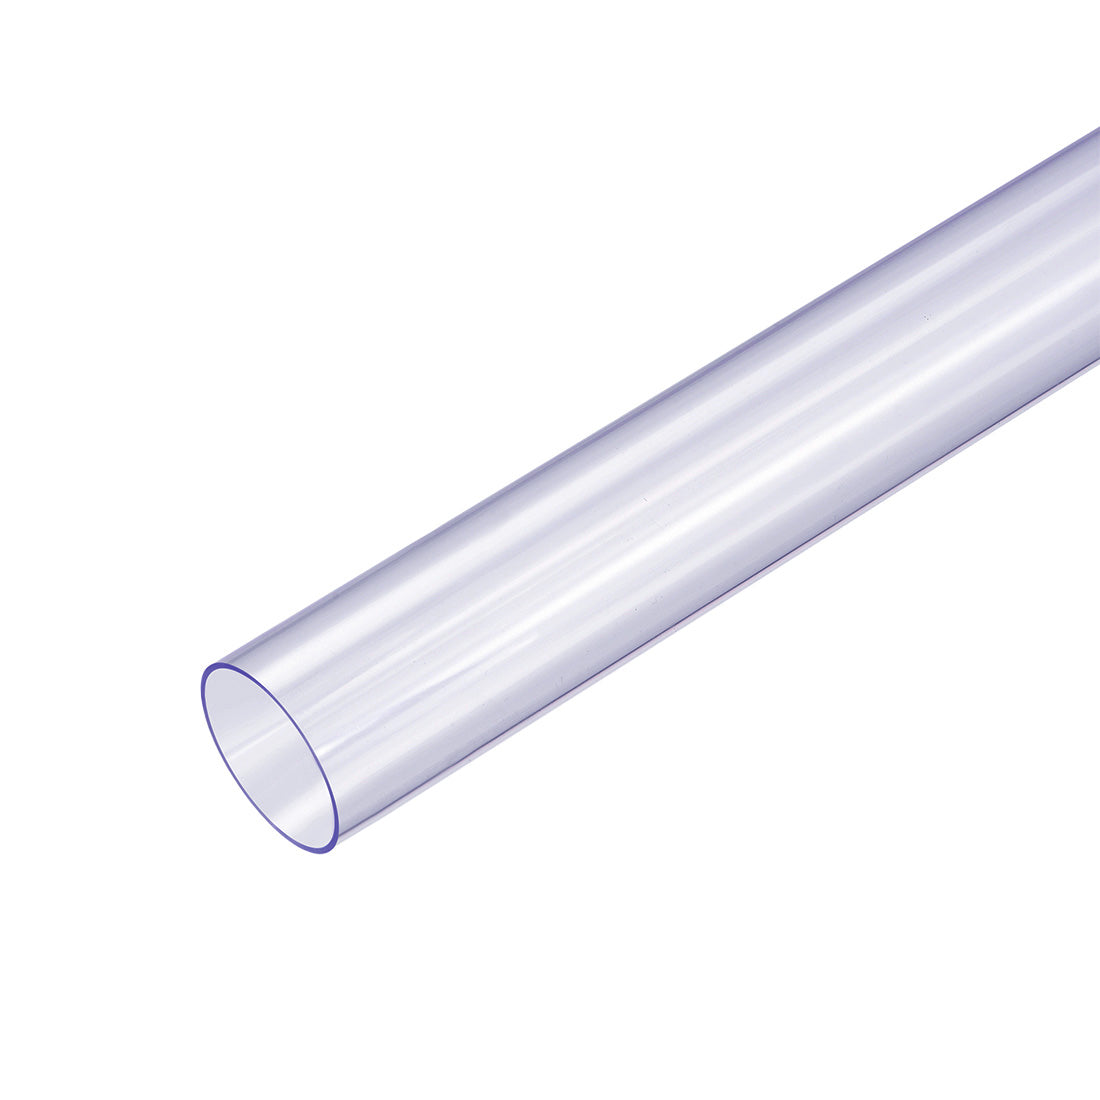 uxcell Uxcell PVC Rigid Round Tubing,Clear with light blue ,20mm ID x 25mm OD,0.5M/1.64Ft Length,2pcs